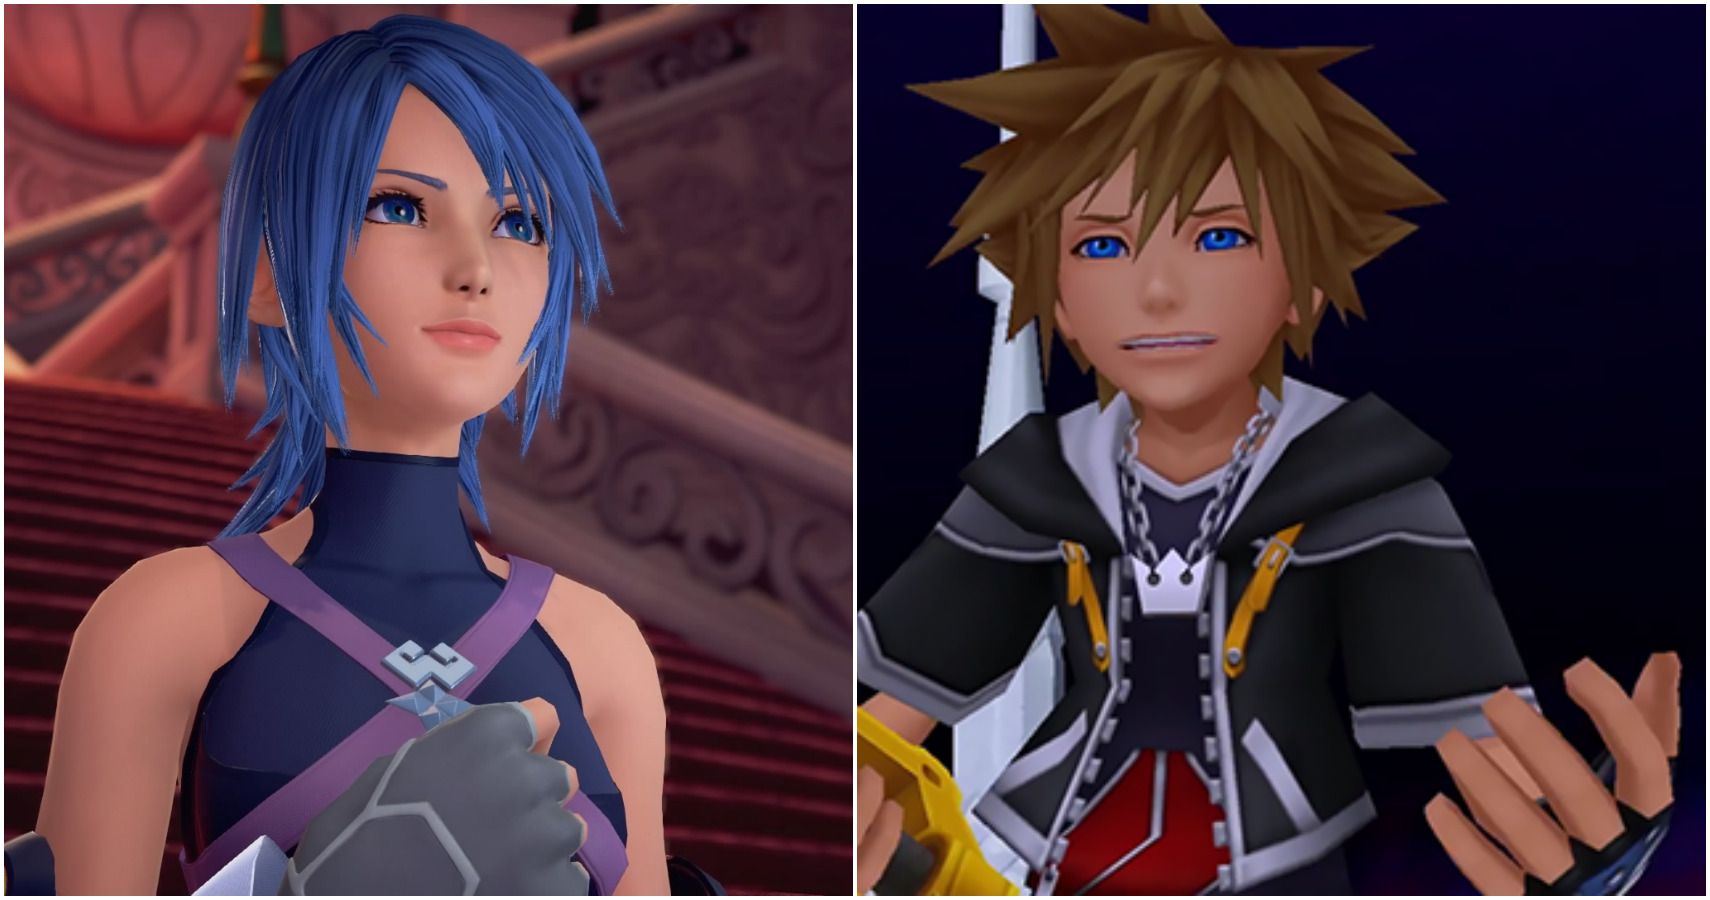 Kingdom Hearts 2 Is The Series' Best Game